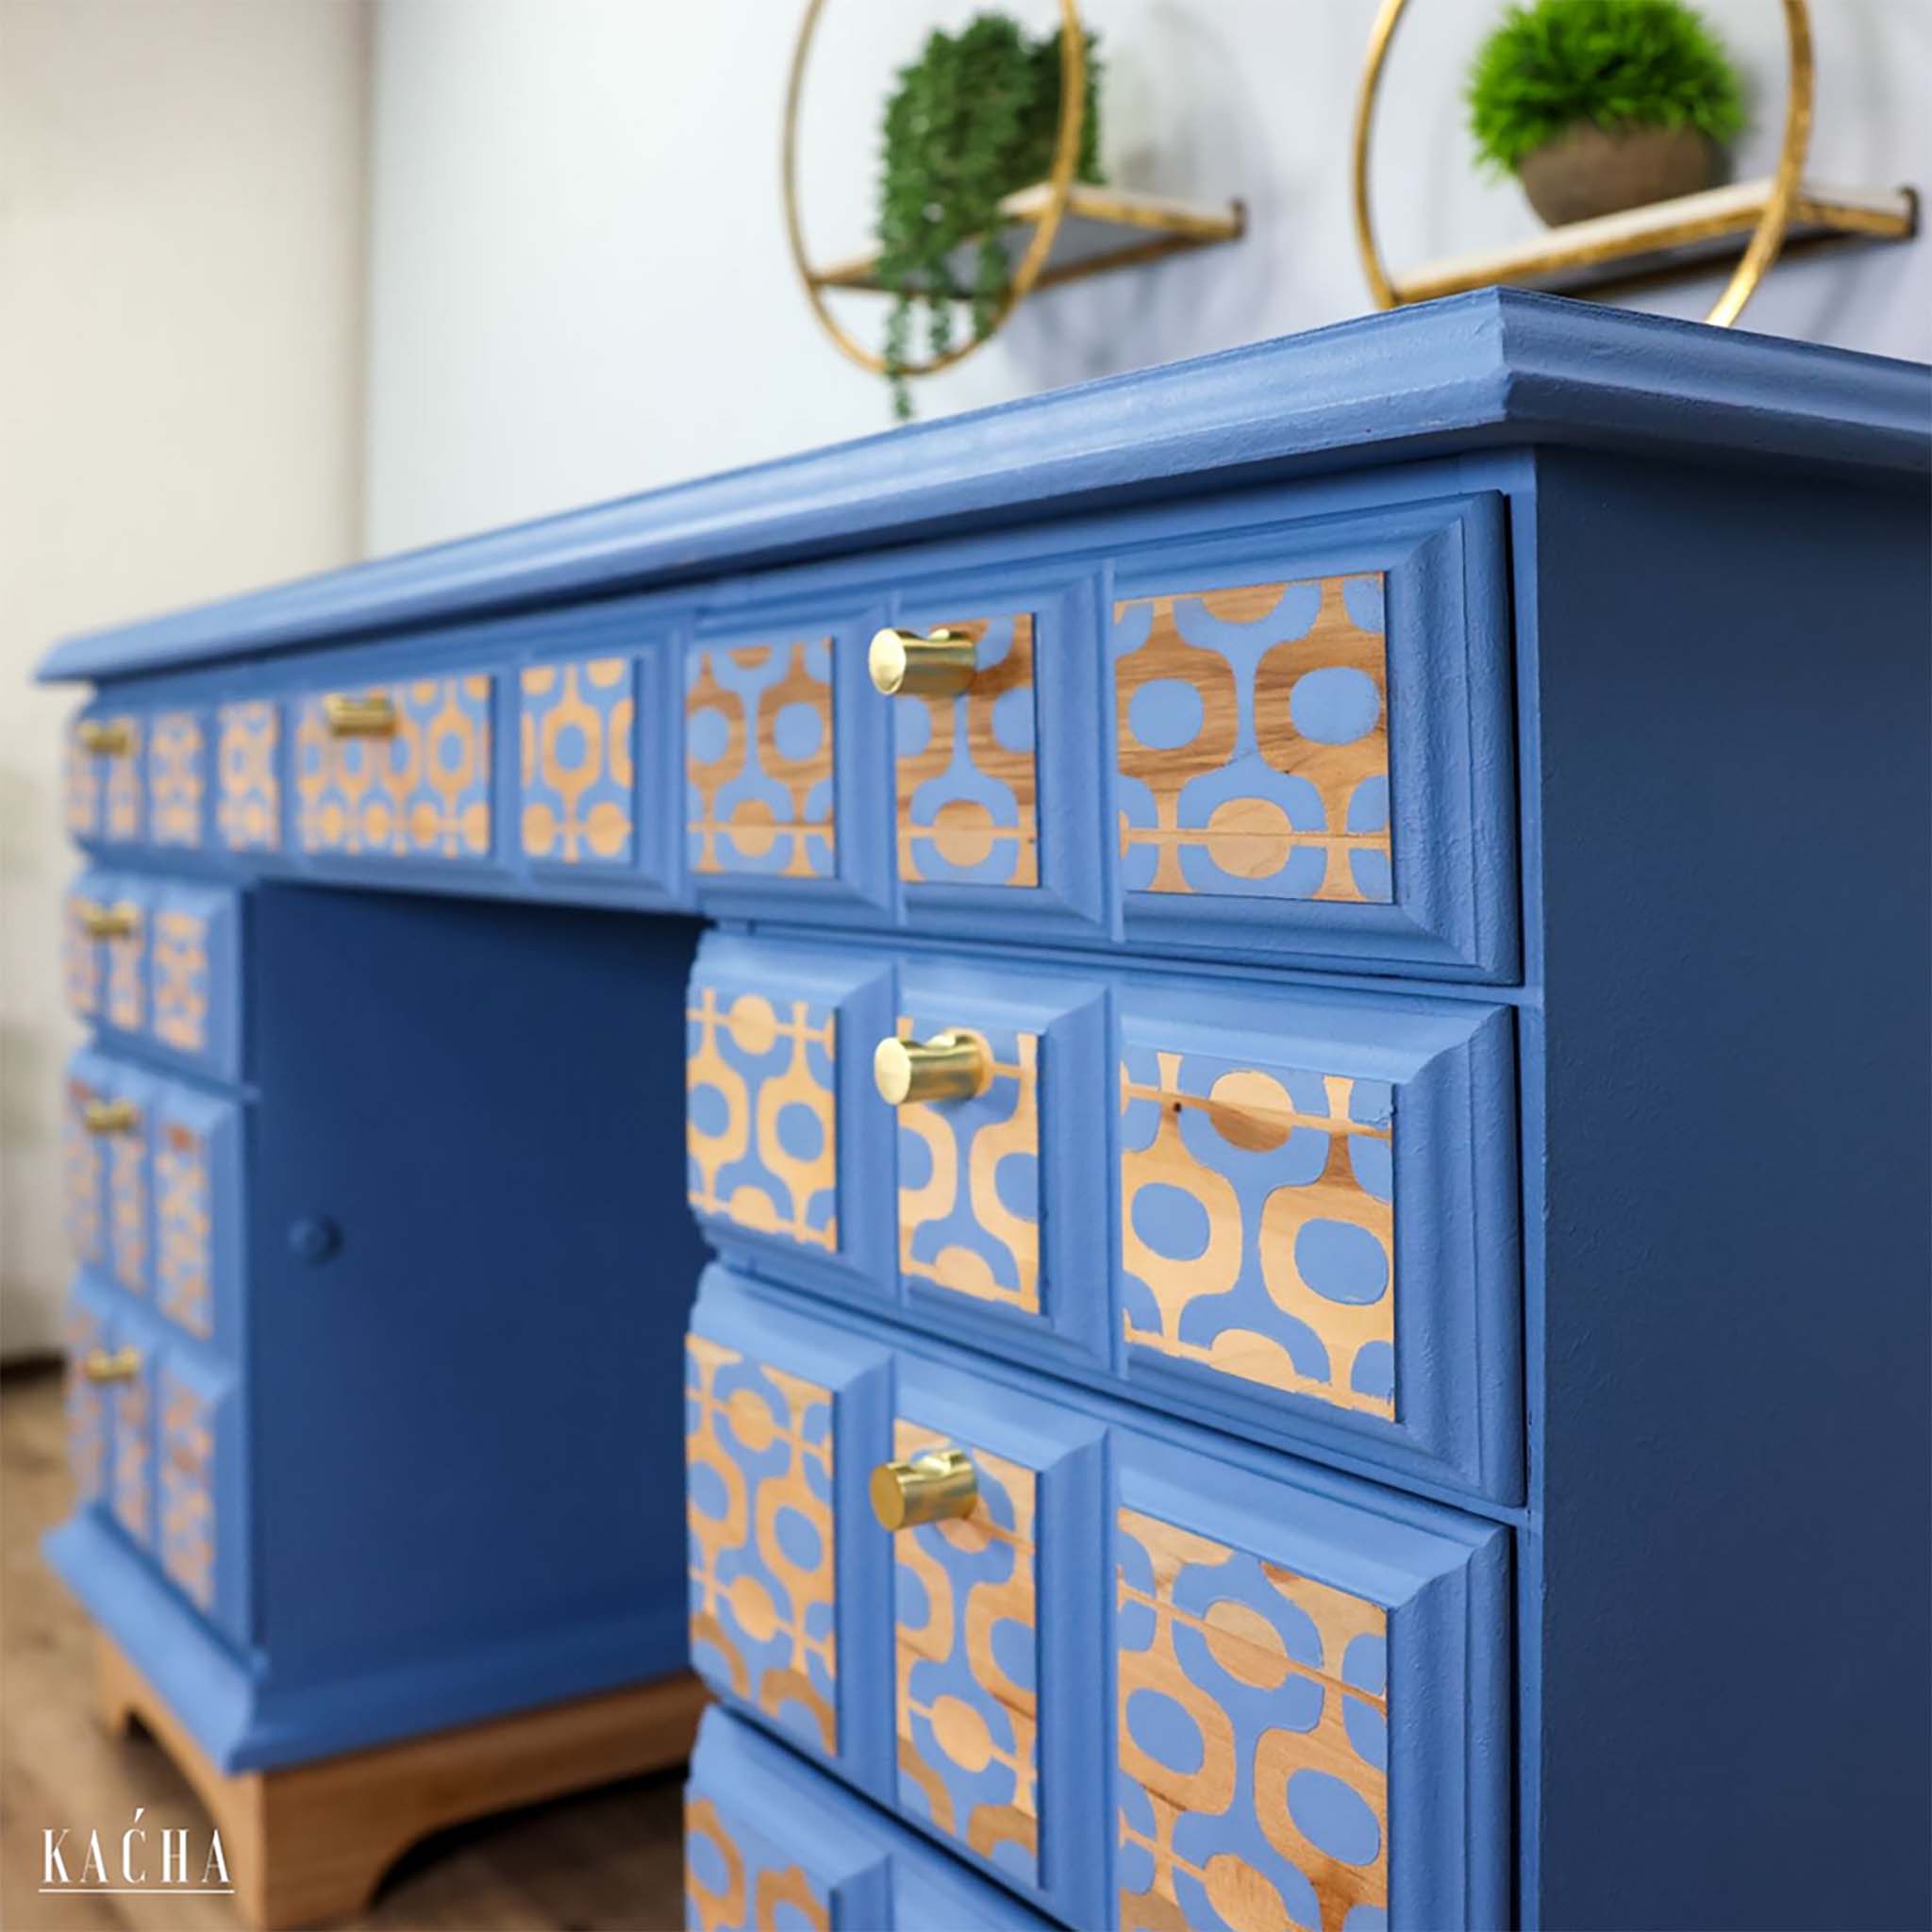 A vintage desk refurbished by Kacha is painted blue and features ReDesign with Prima's Midcentury Vibes stencil in gold on its drawers.